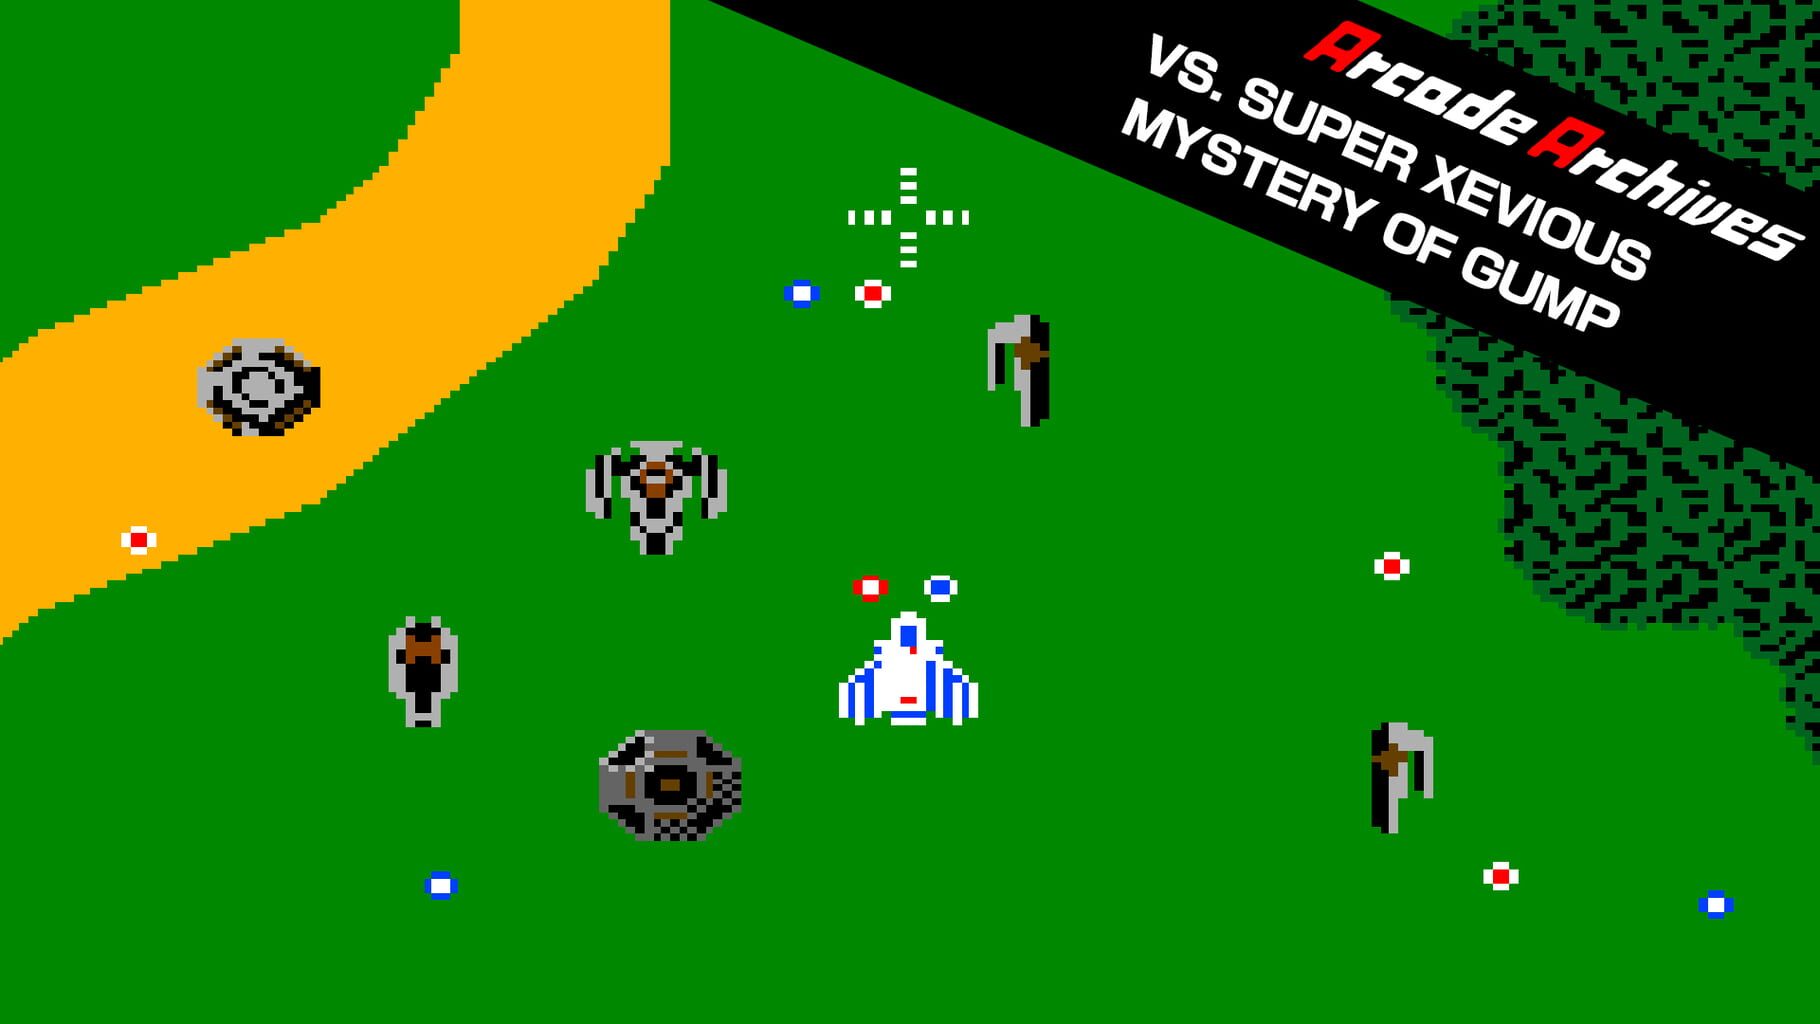 Arte - Arcade Archives: vs. Super Xevious Mystery of Gump